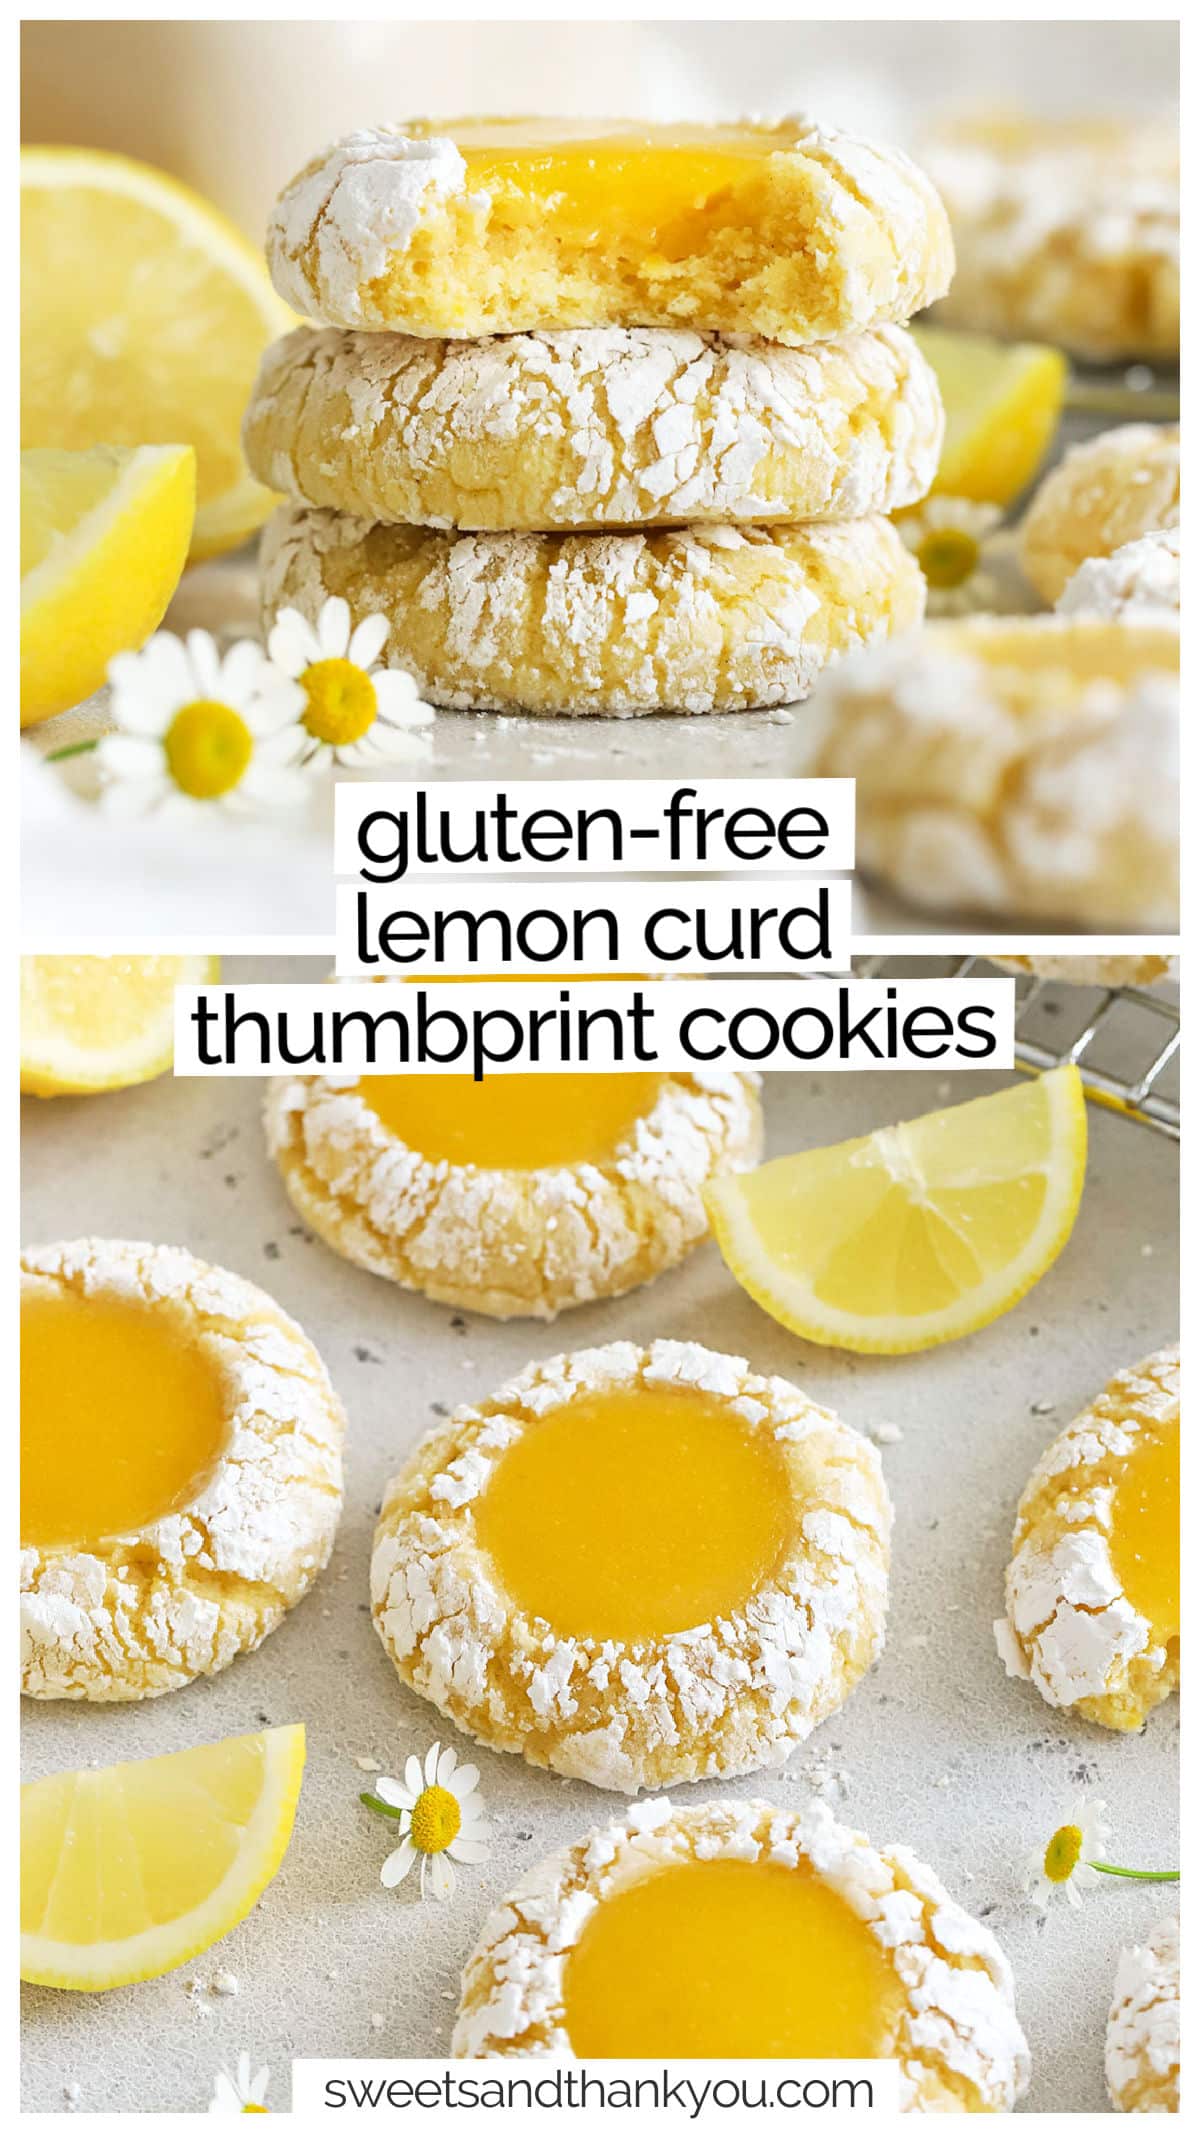 These gluten-free Lemon Thumbprint Cookies are made with a soft lemon crinkle cookie base and a dollop of homemade lemon curd filling for a double-dose of lemon goodness! They're the gluten-free lemon cookie recipe MADE for lemon lovers! We love them in the spring & summer or for the holidays. 